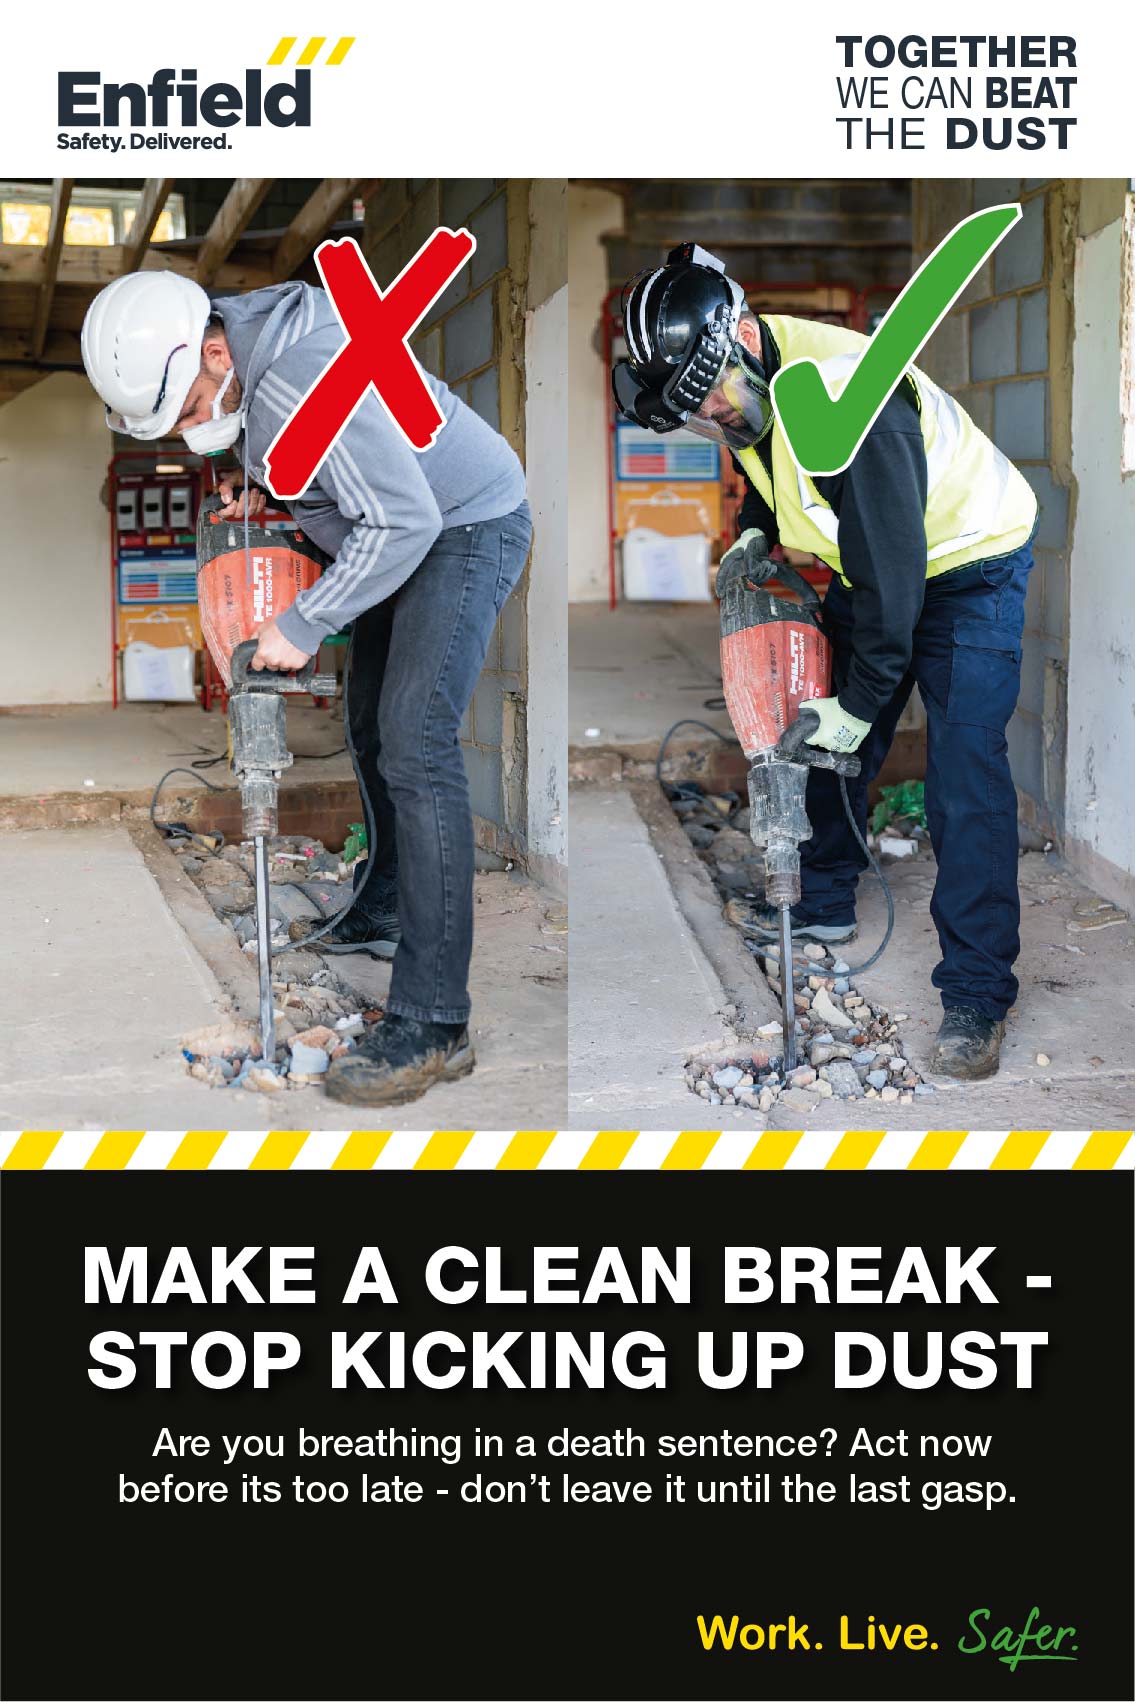 Enfield Dust Safety Poster 5